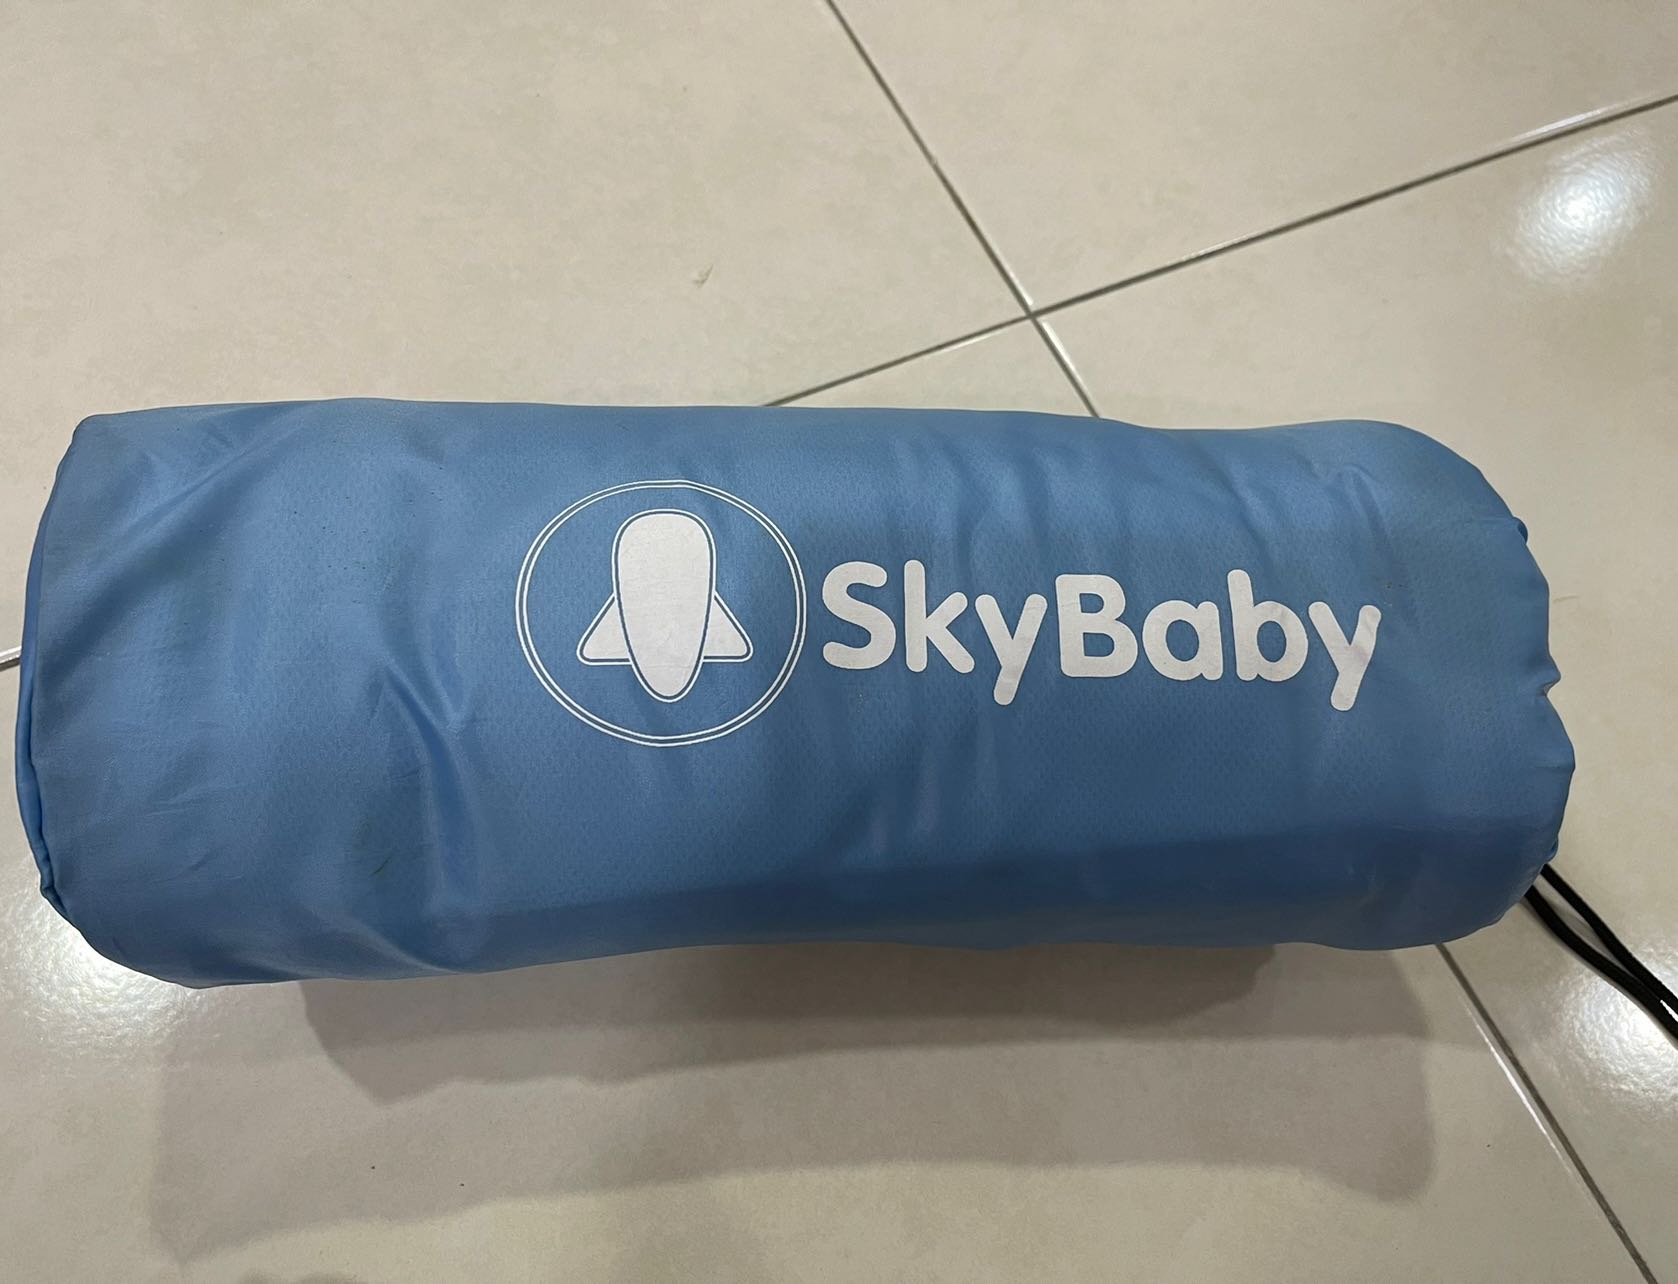 skybaby travel mattress for air travel review